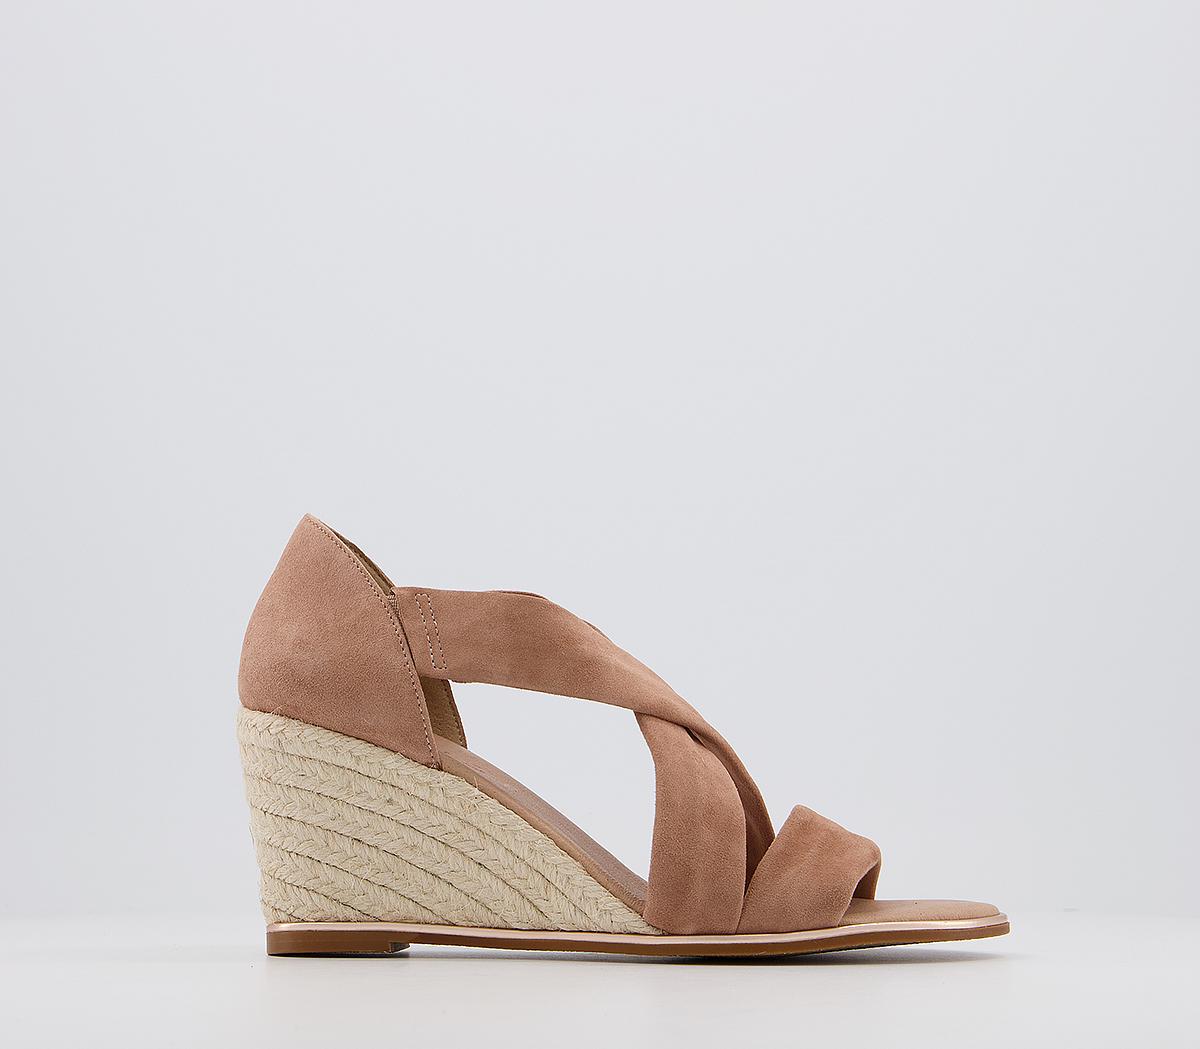 OFFICEMaiden Cross Strap WedgesNude Suede Rose Gold Rand